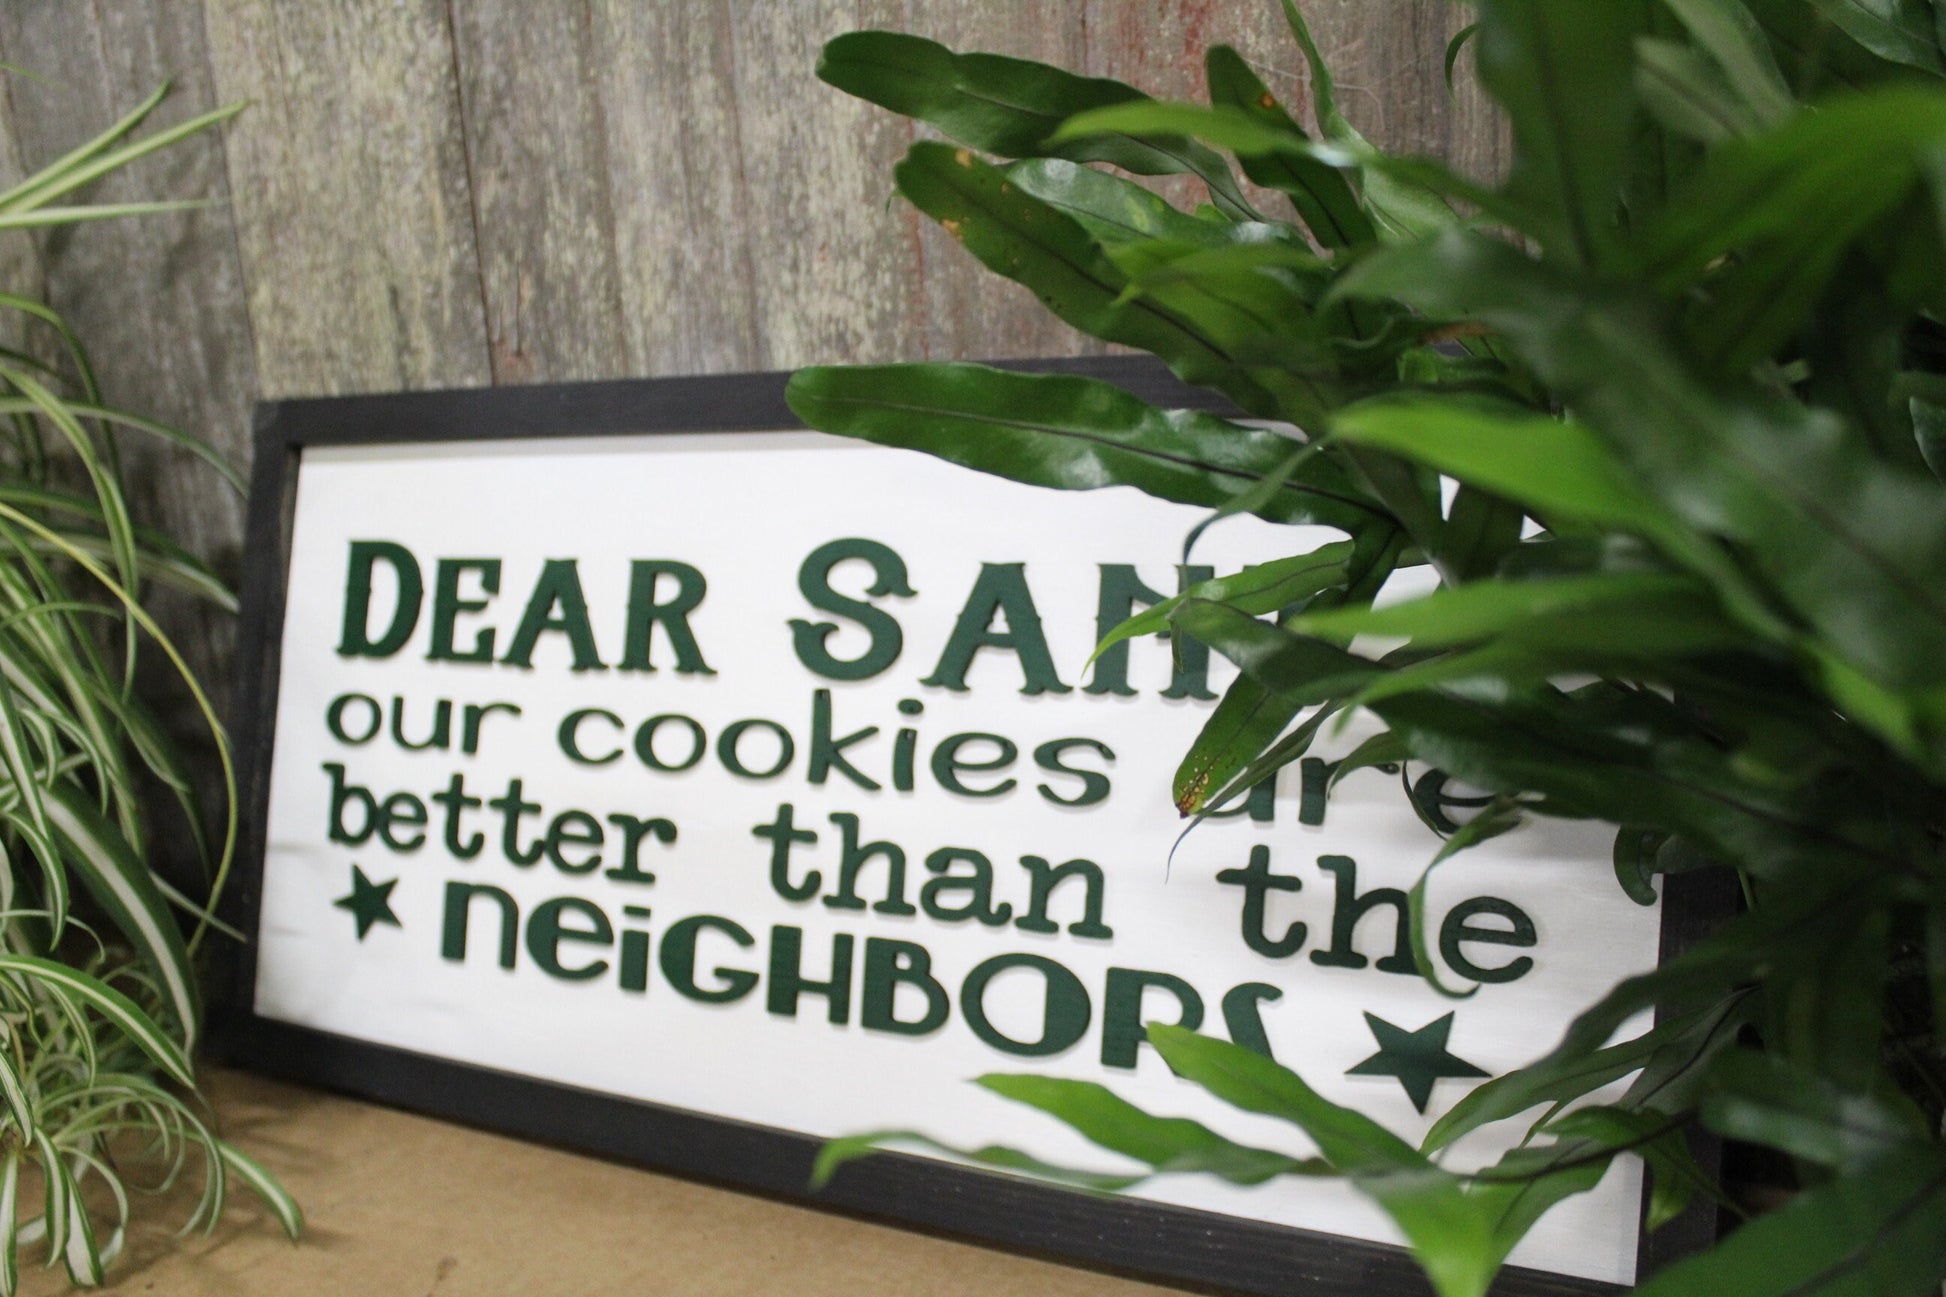 Dear Santa Cookies Funny Sign Our Cookies Are Better Than The Neighbors Raised Text Wood Sign Country Primitive Wall Decoration Christmas